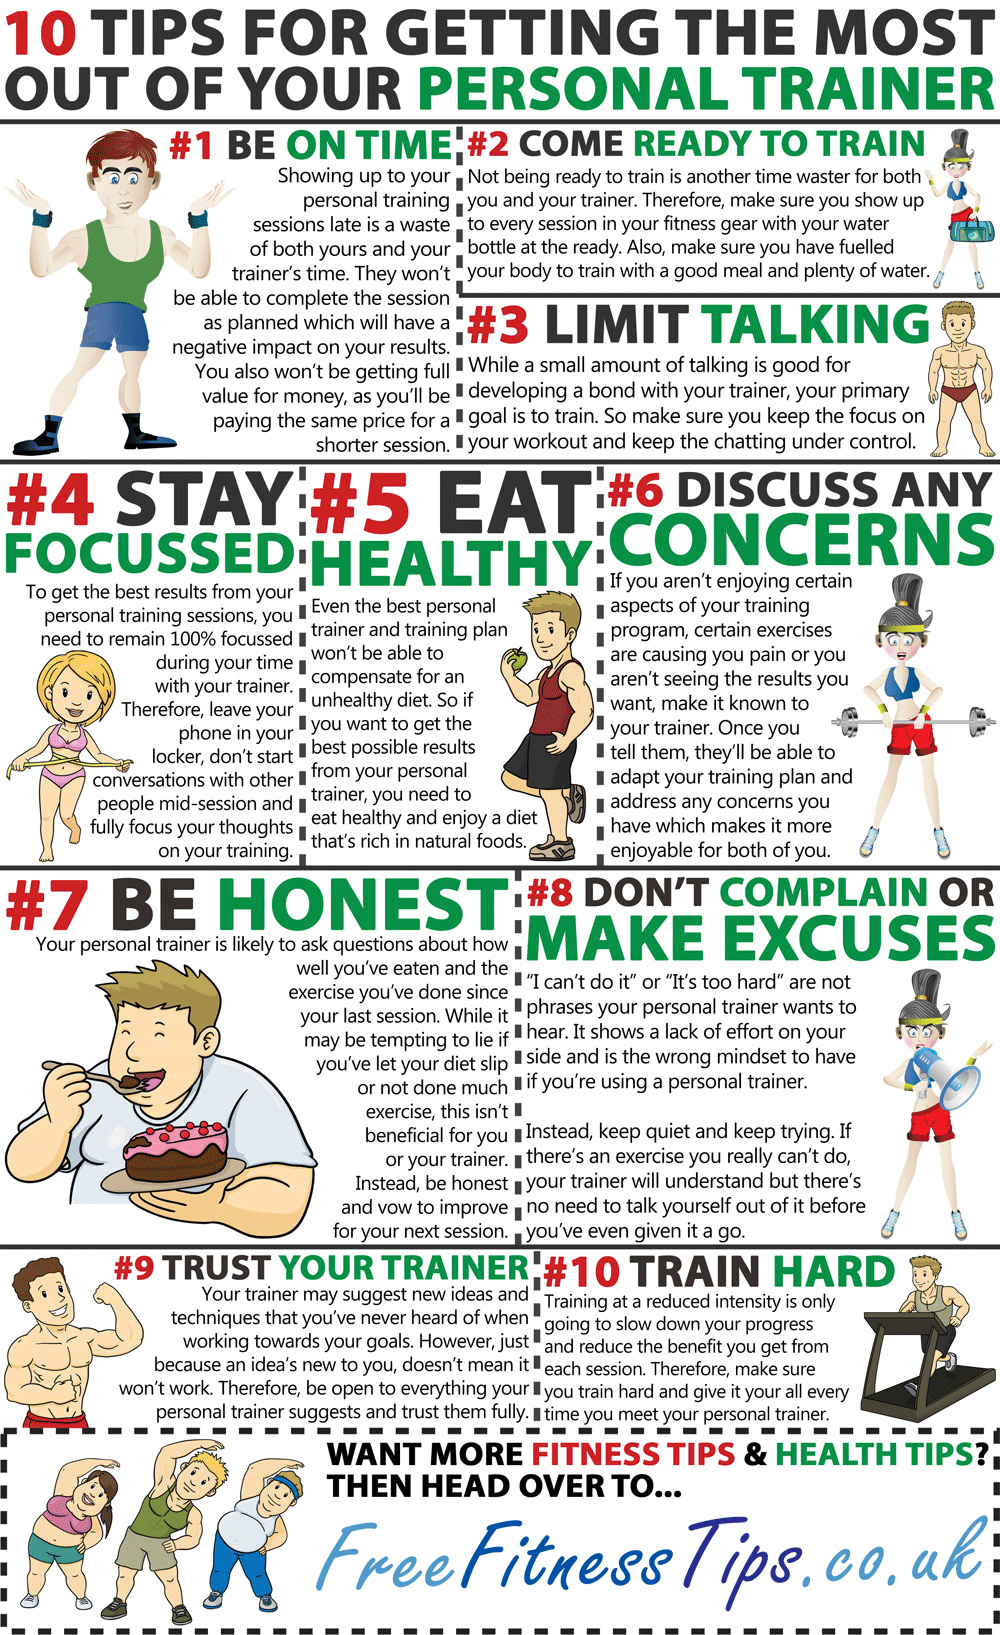 How To Make The Best Out Of Your Personal Trainer - Infographic